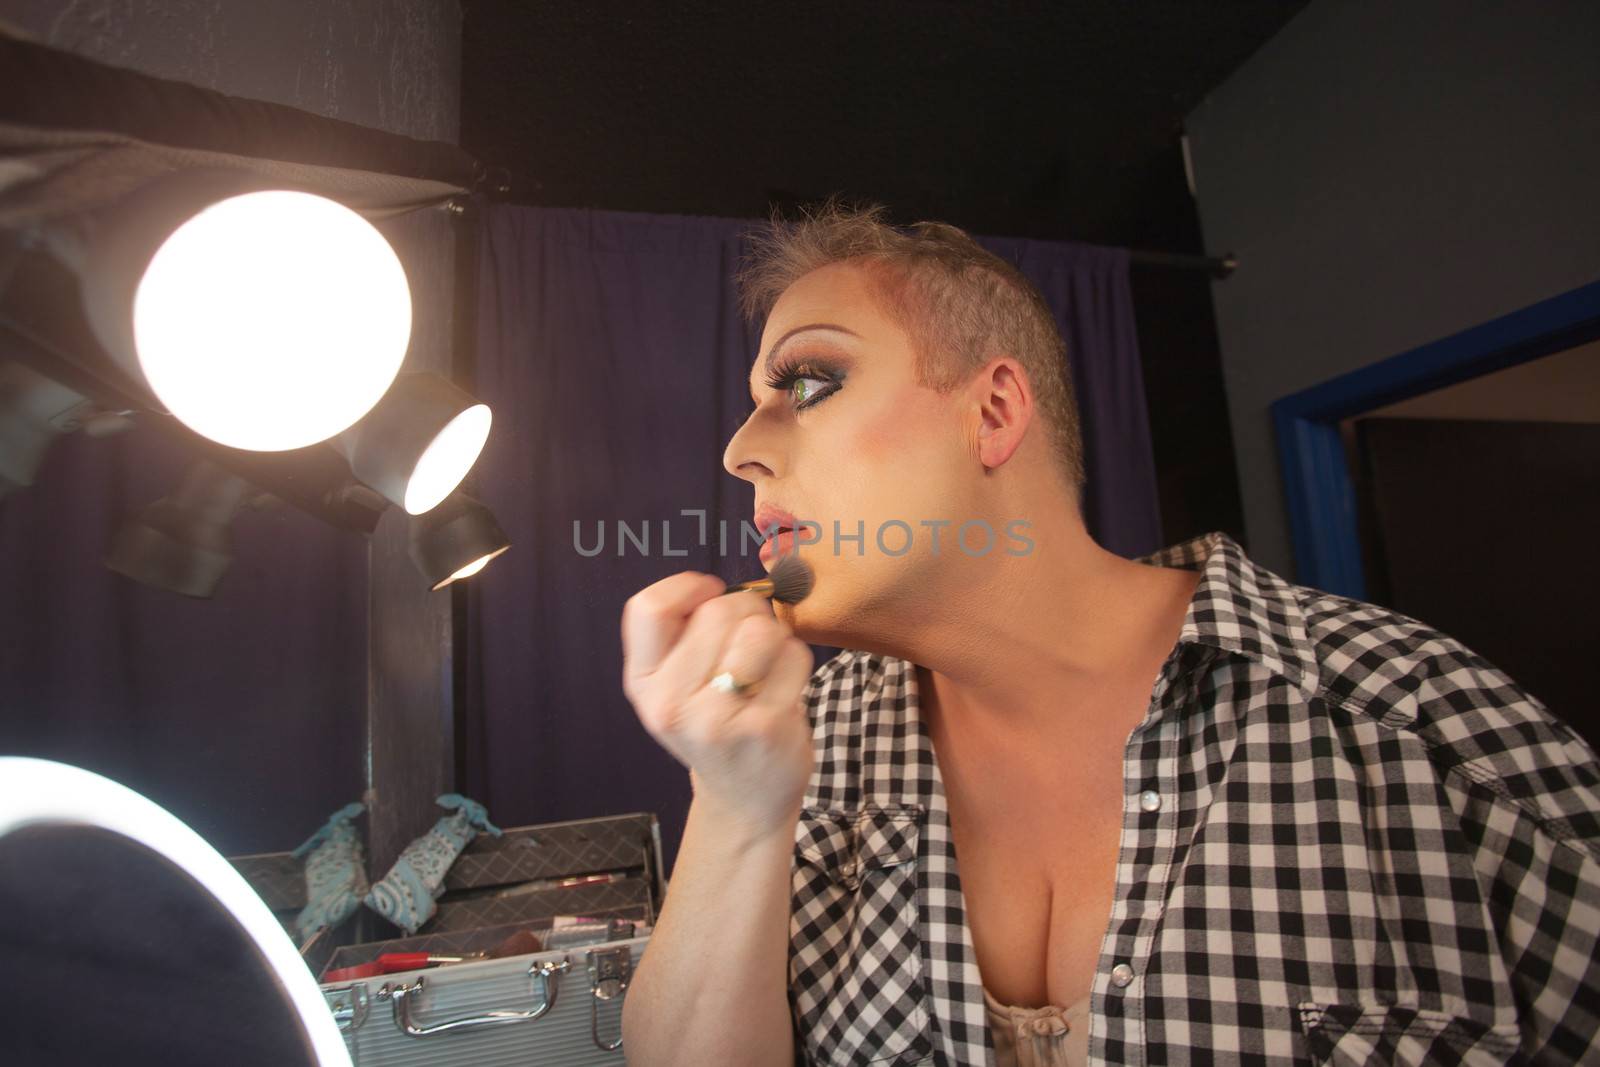 Man in dressing room preparing face for drag queen show